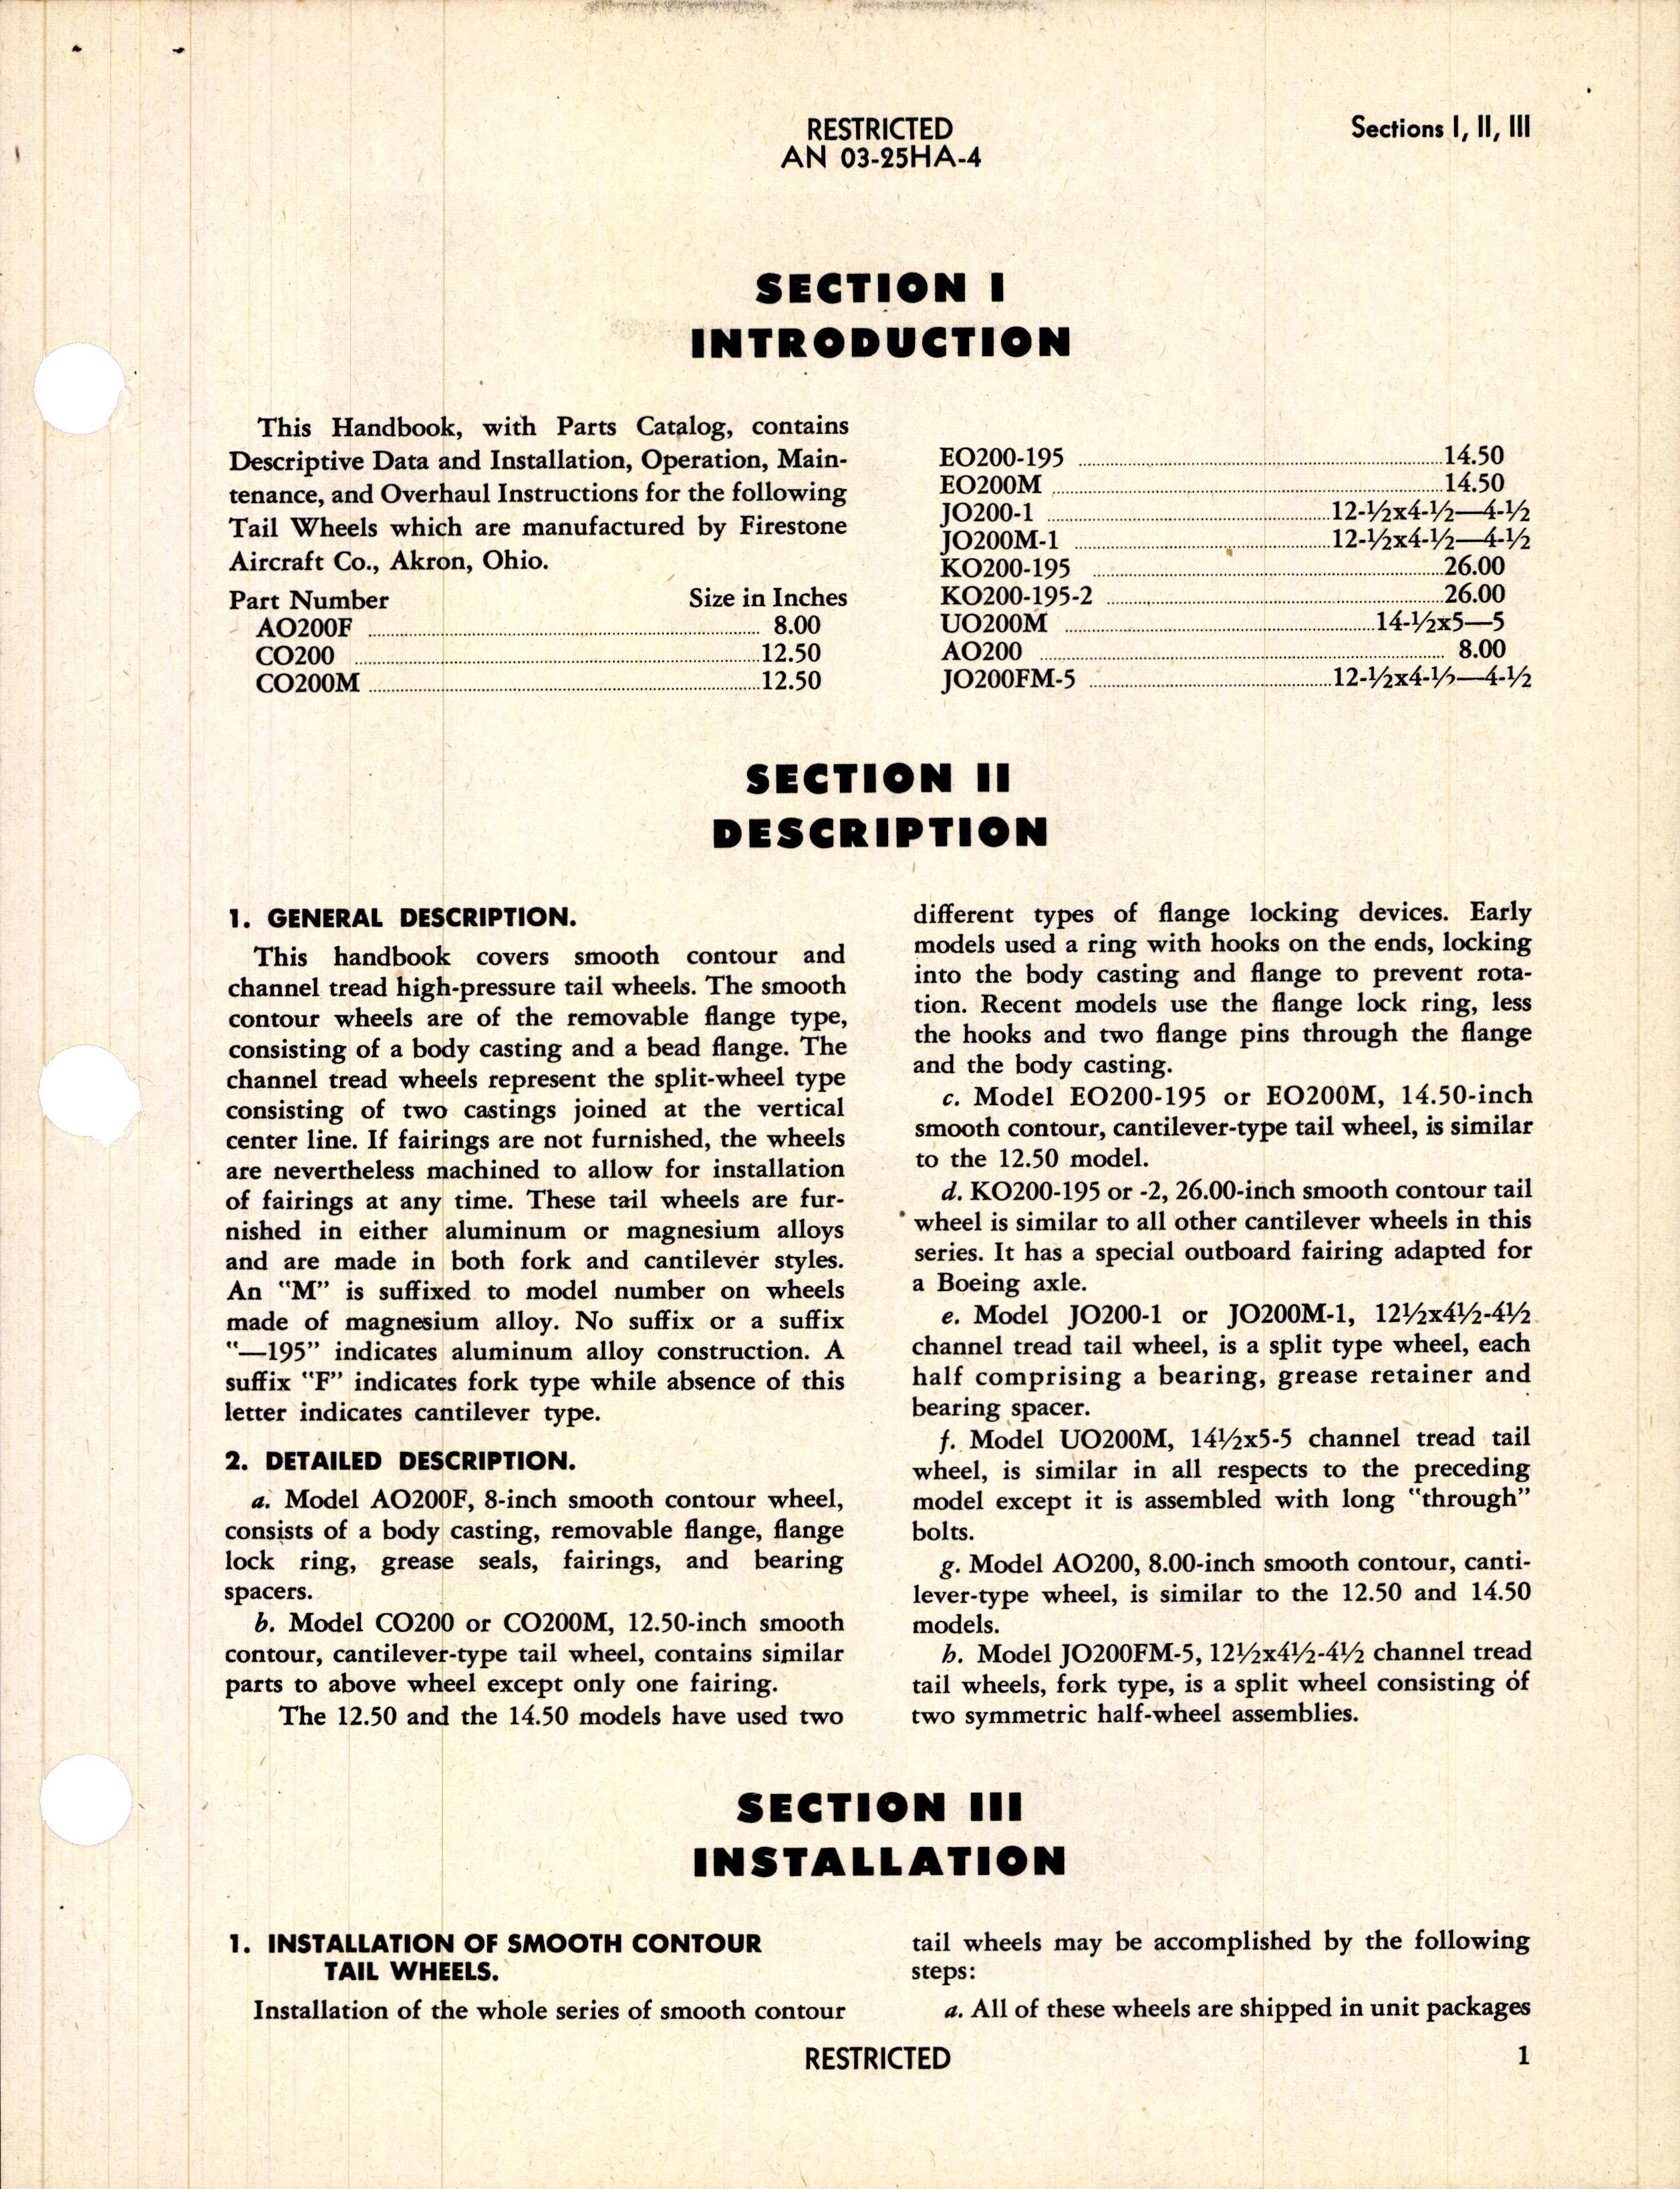 Sample page 11 from AirCorps Library document: Operation, Service and Overhaul Instructions with Parts Catalog for Tail Wheels